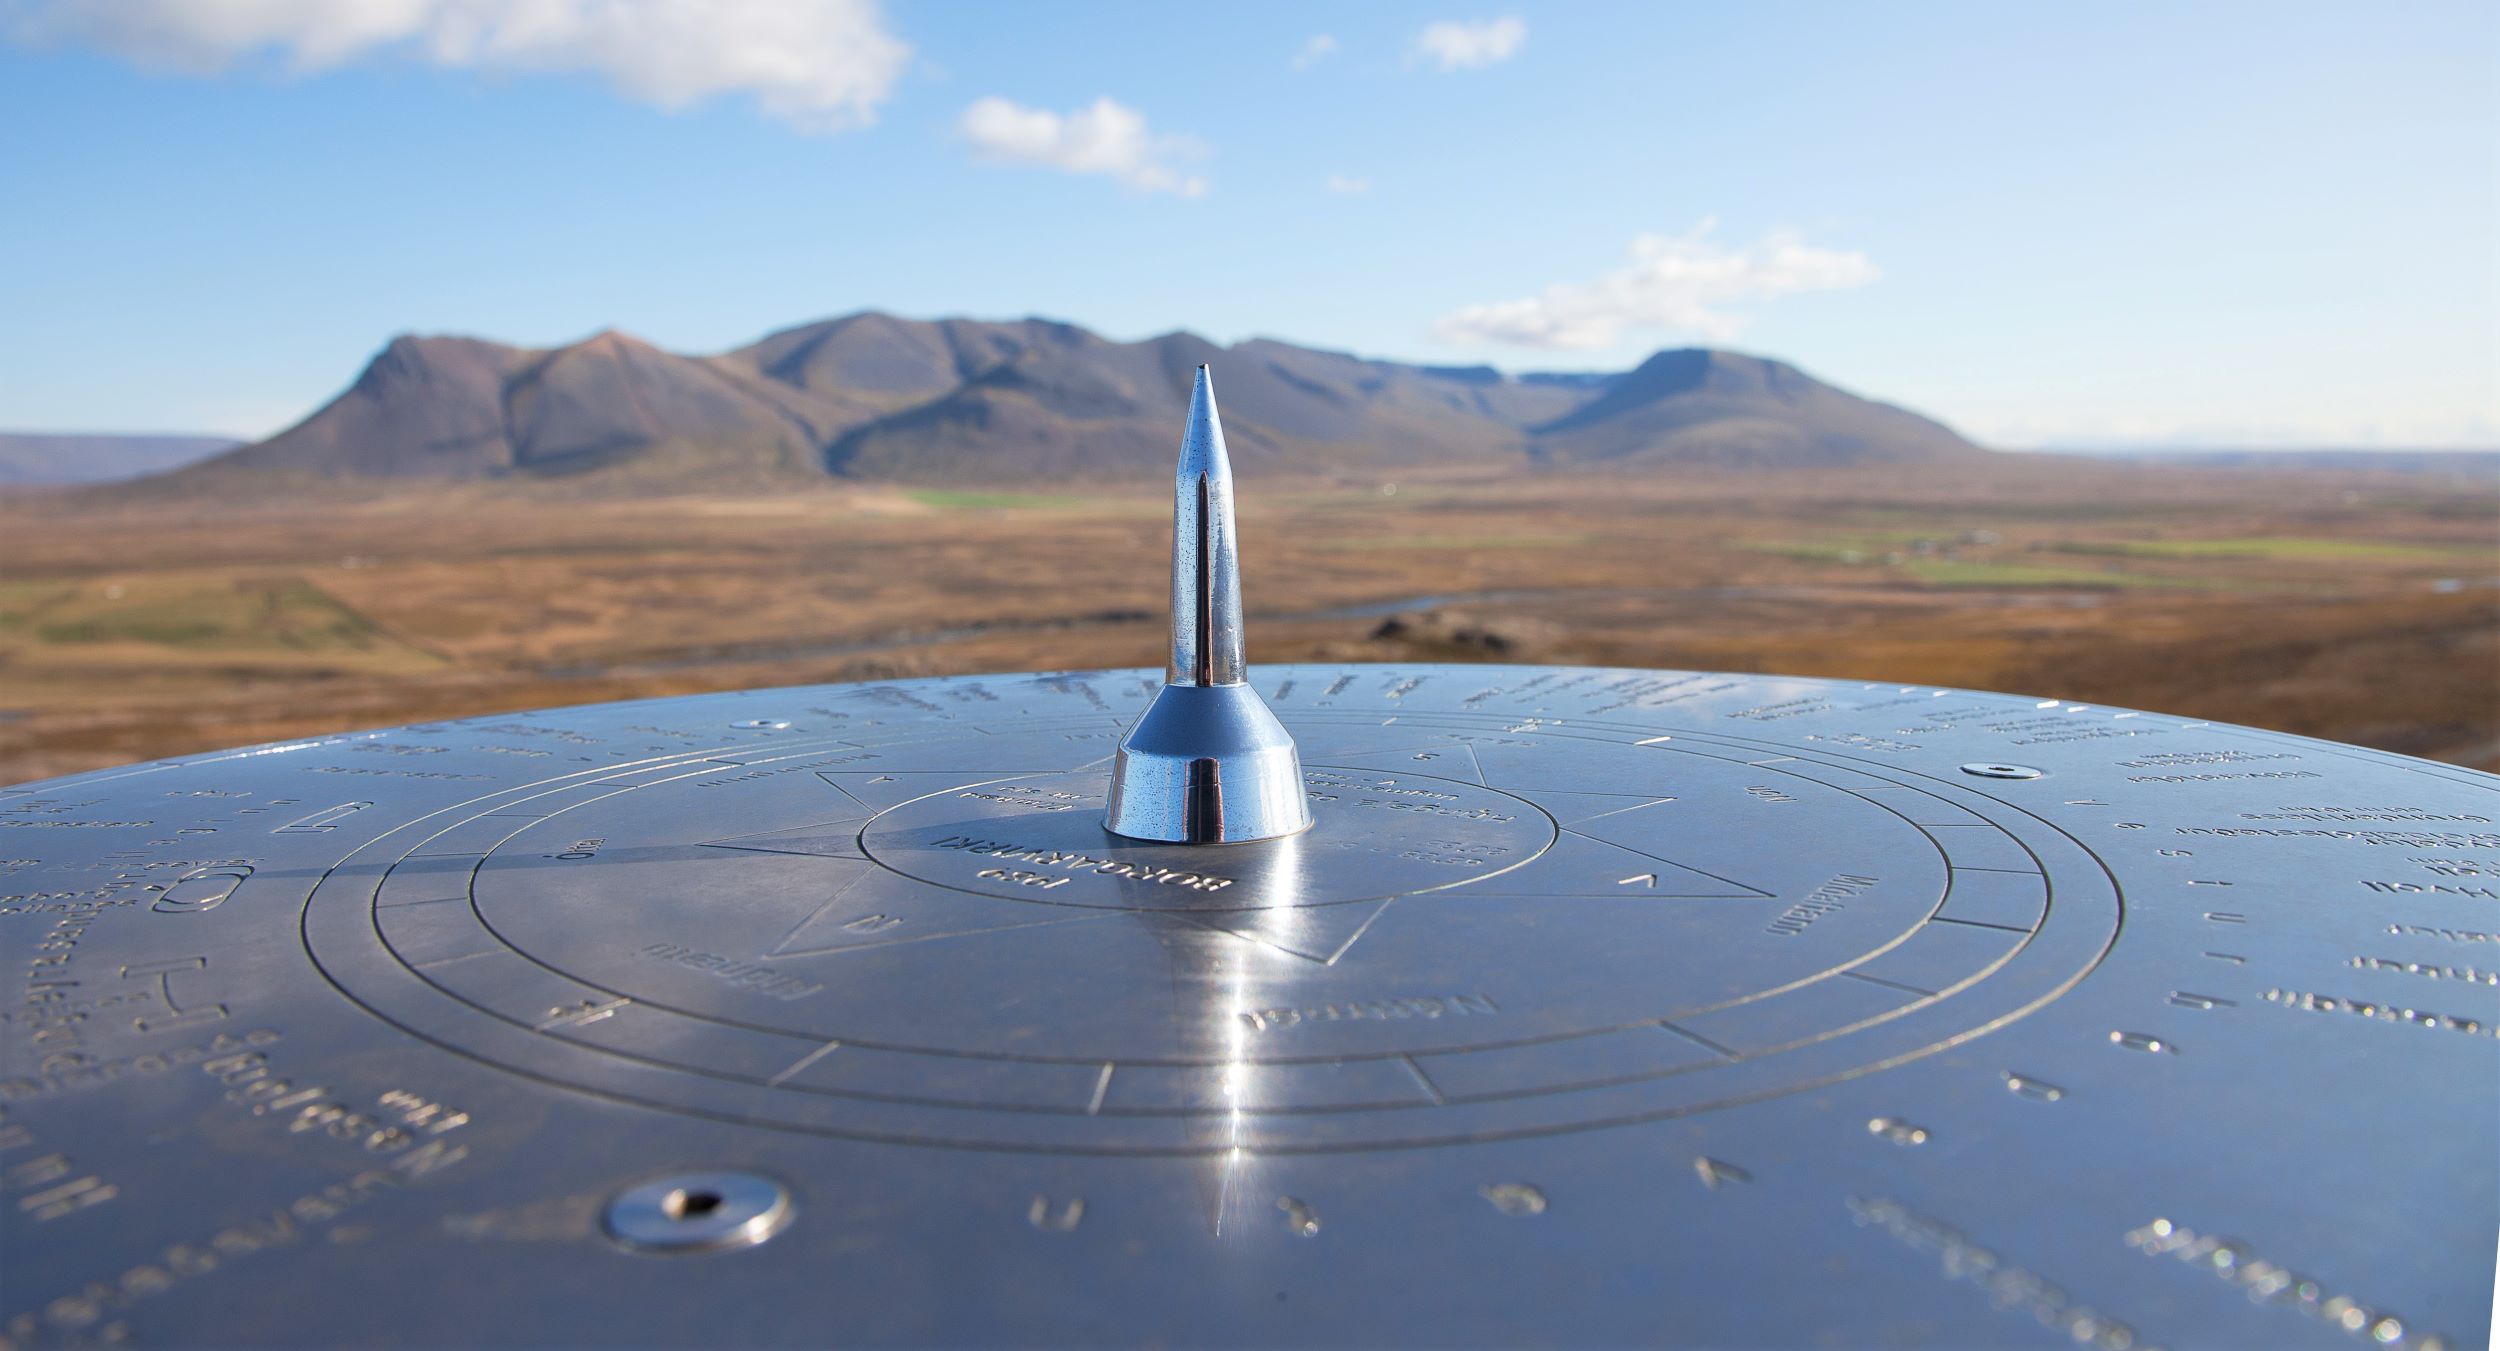 Closeup of a compass at Borgarvirki in the foreground, mountain group in the background